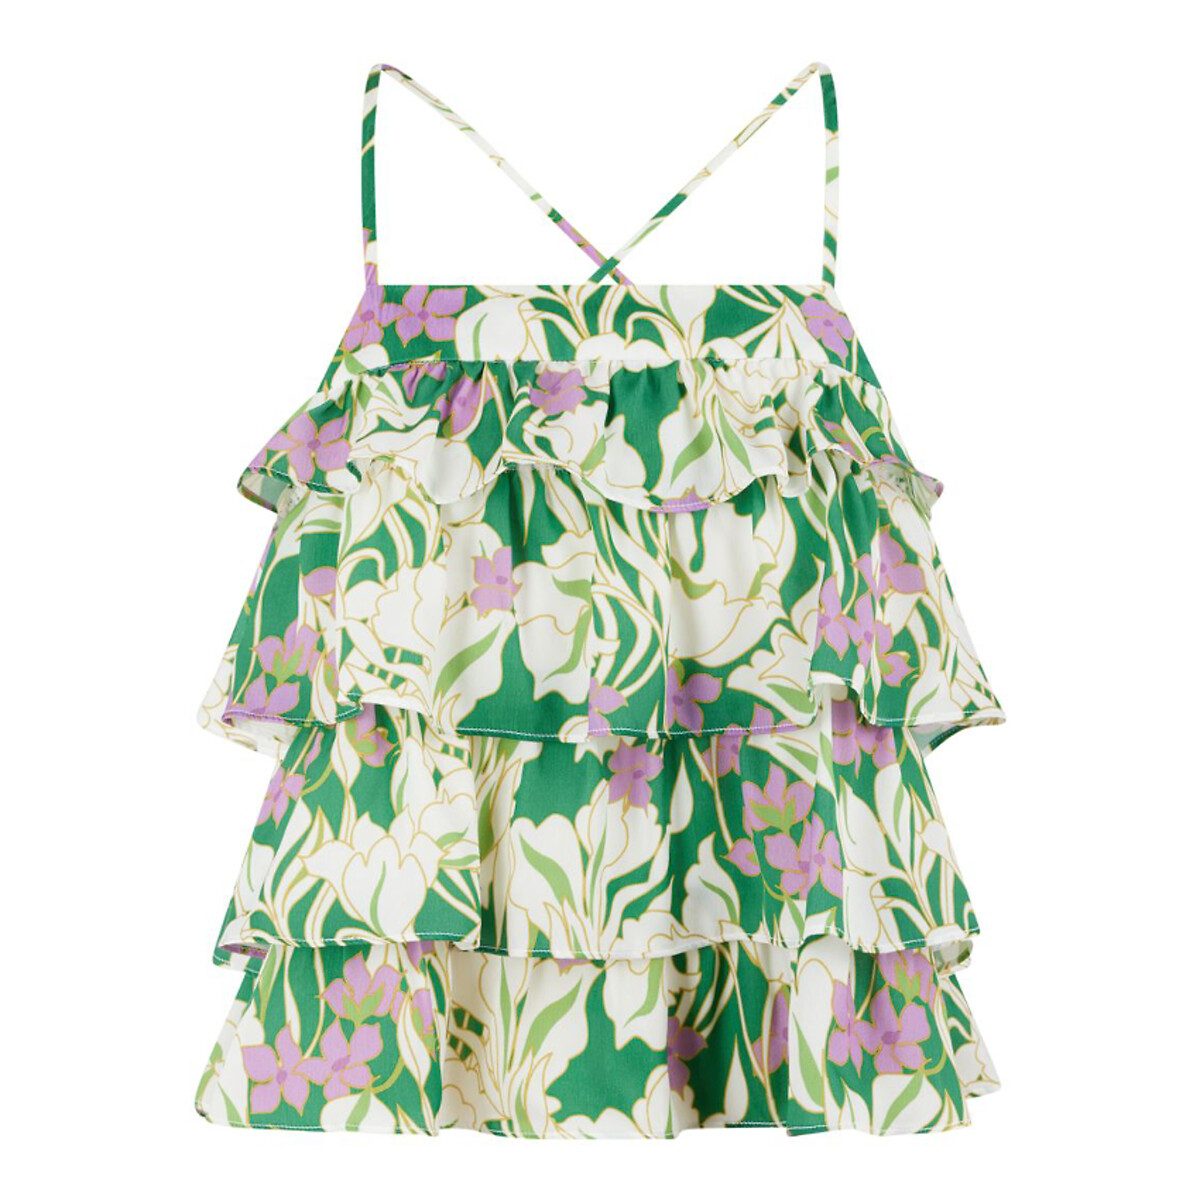 floral print ruffled top with crossover spaghetti straps